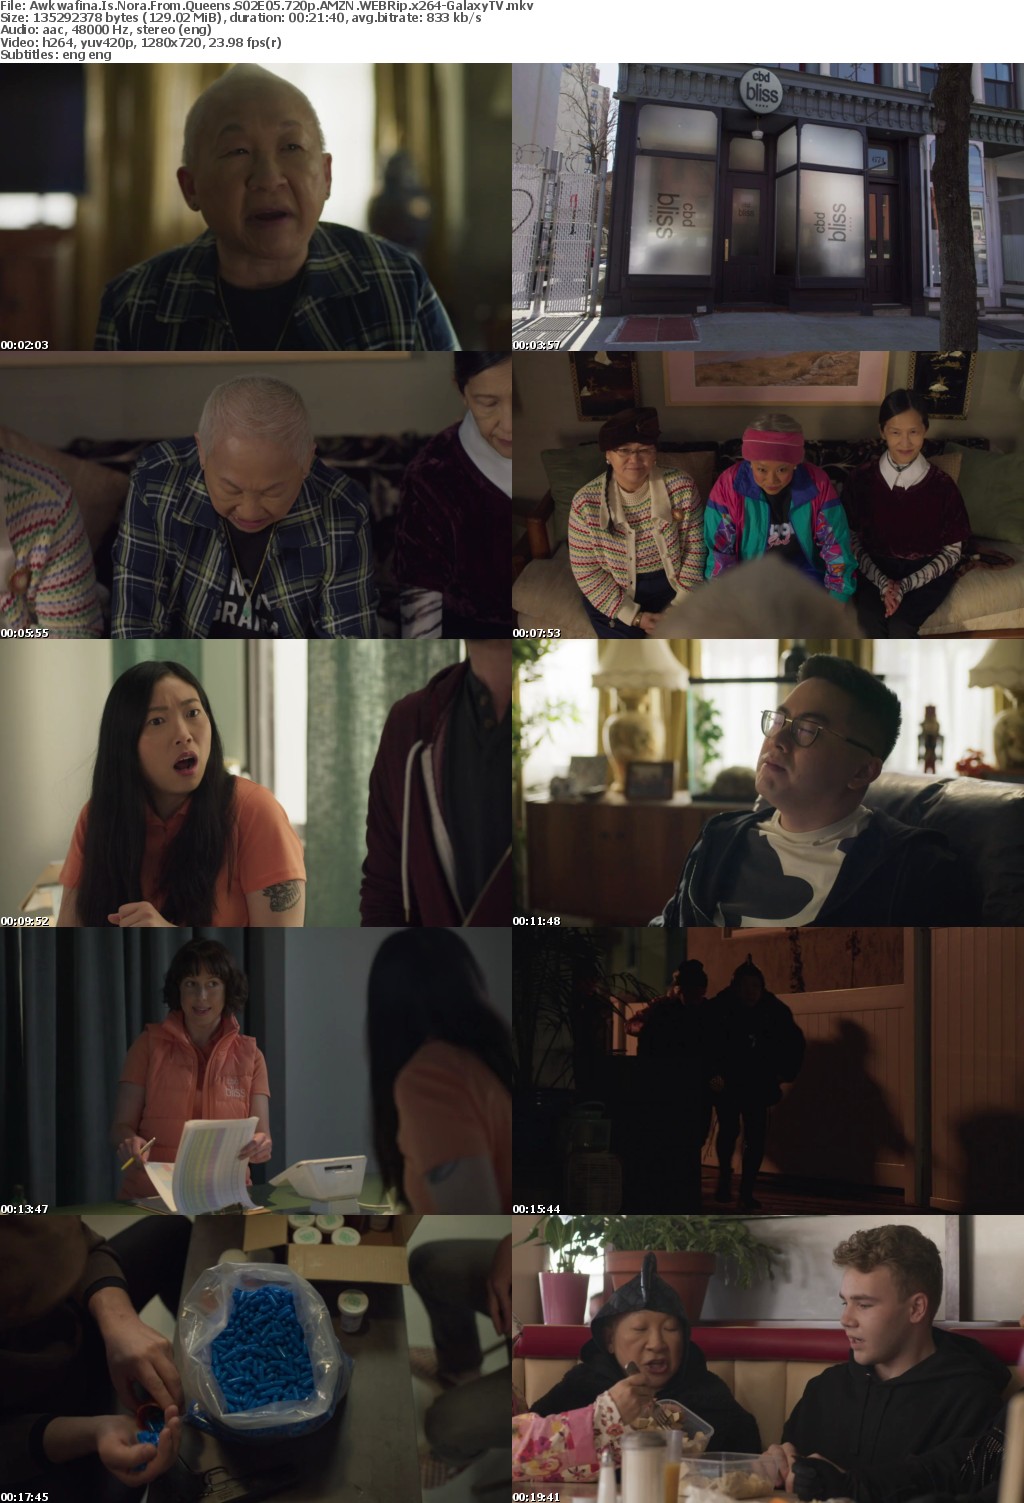 Awkwafina Is Nora From Queens S02 COMPLETE 720p AMZN WEBRip x264-GalaxyTV